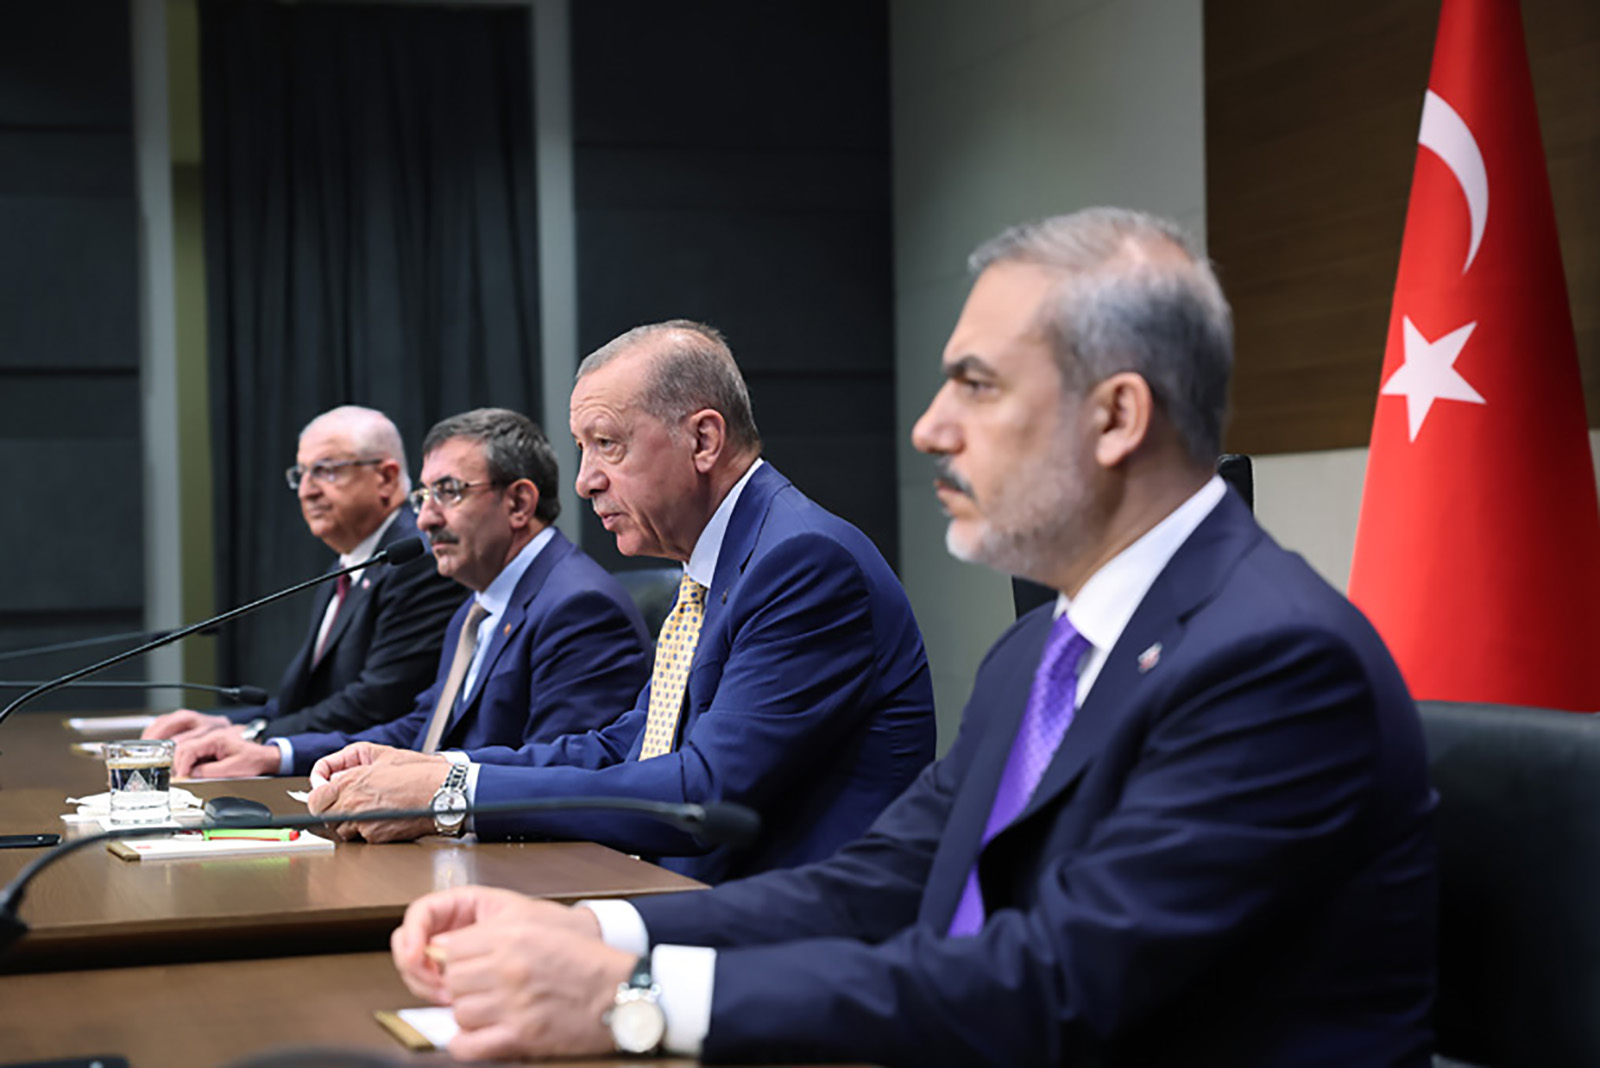 Turkish President Recep Tayyip Erdogan, second right, speaks during a press conference at Ataturk Airport in Istanbul, Turkey, on July 10.